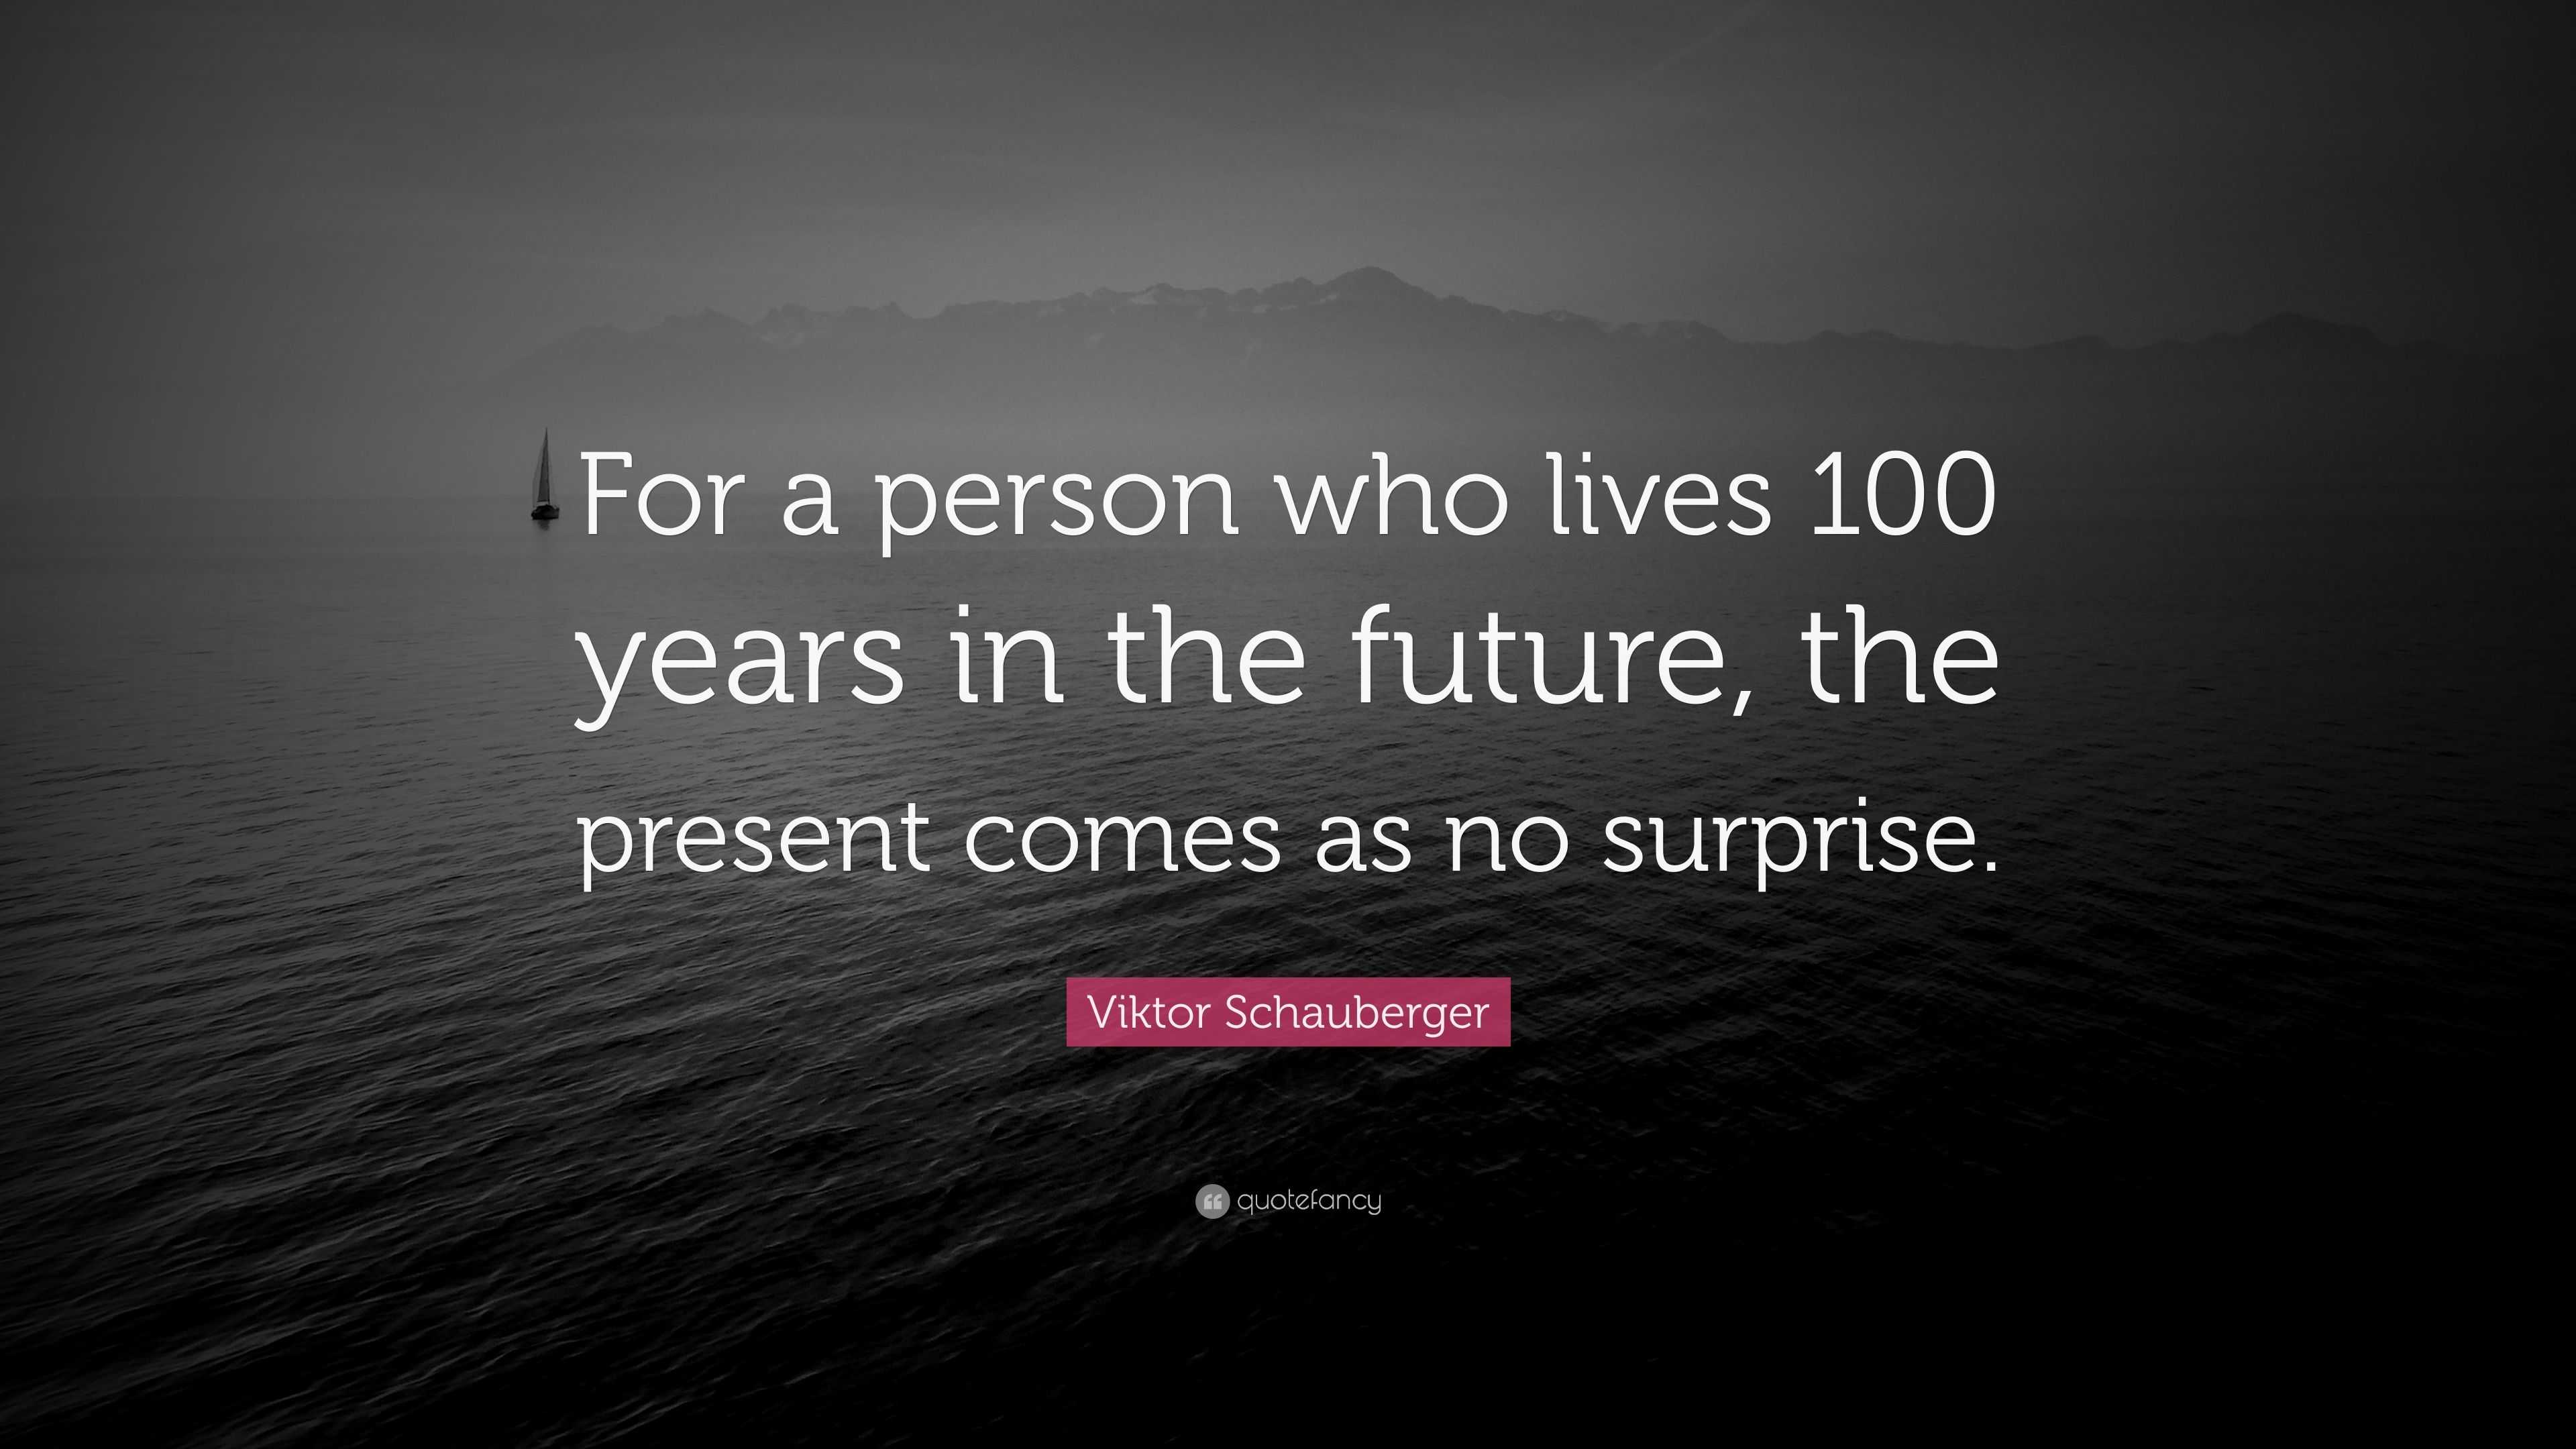 Viktor Schauberger Quote: “For a person who lives  years in the